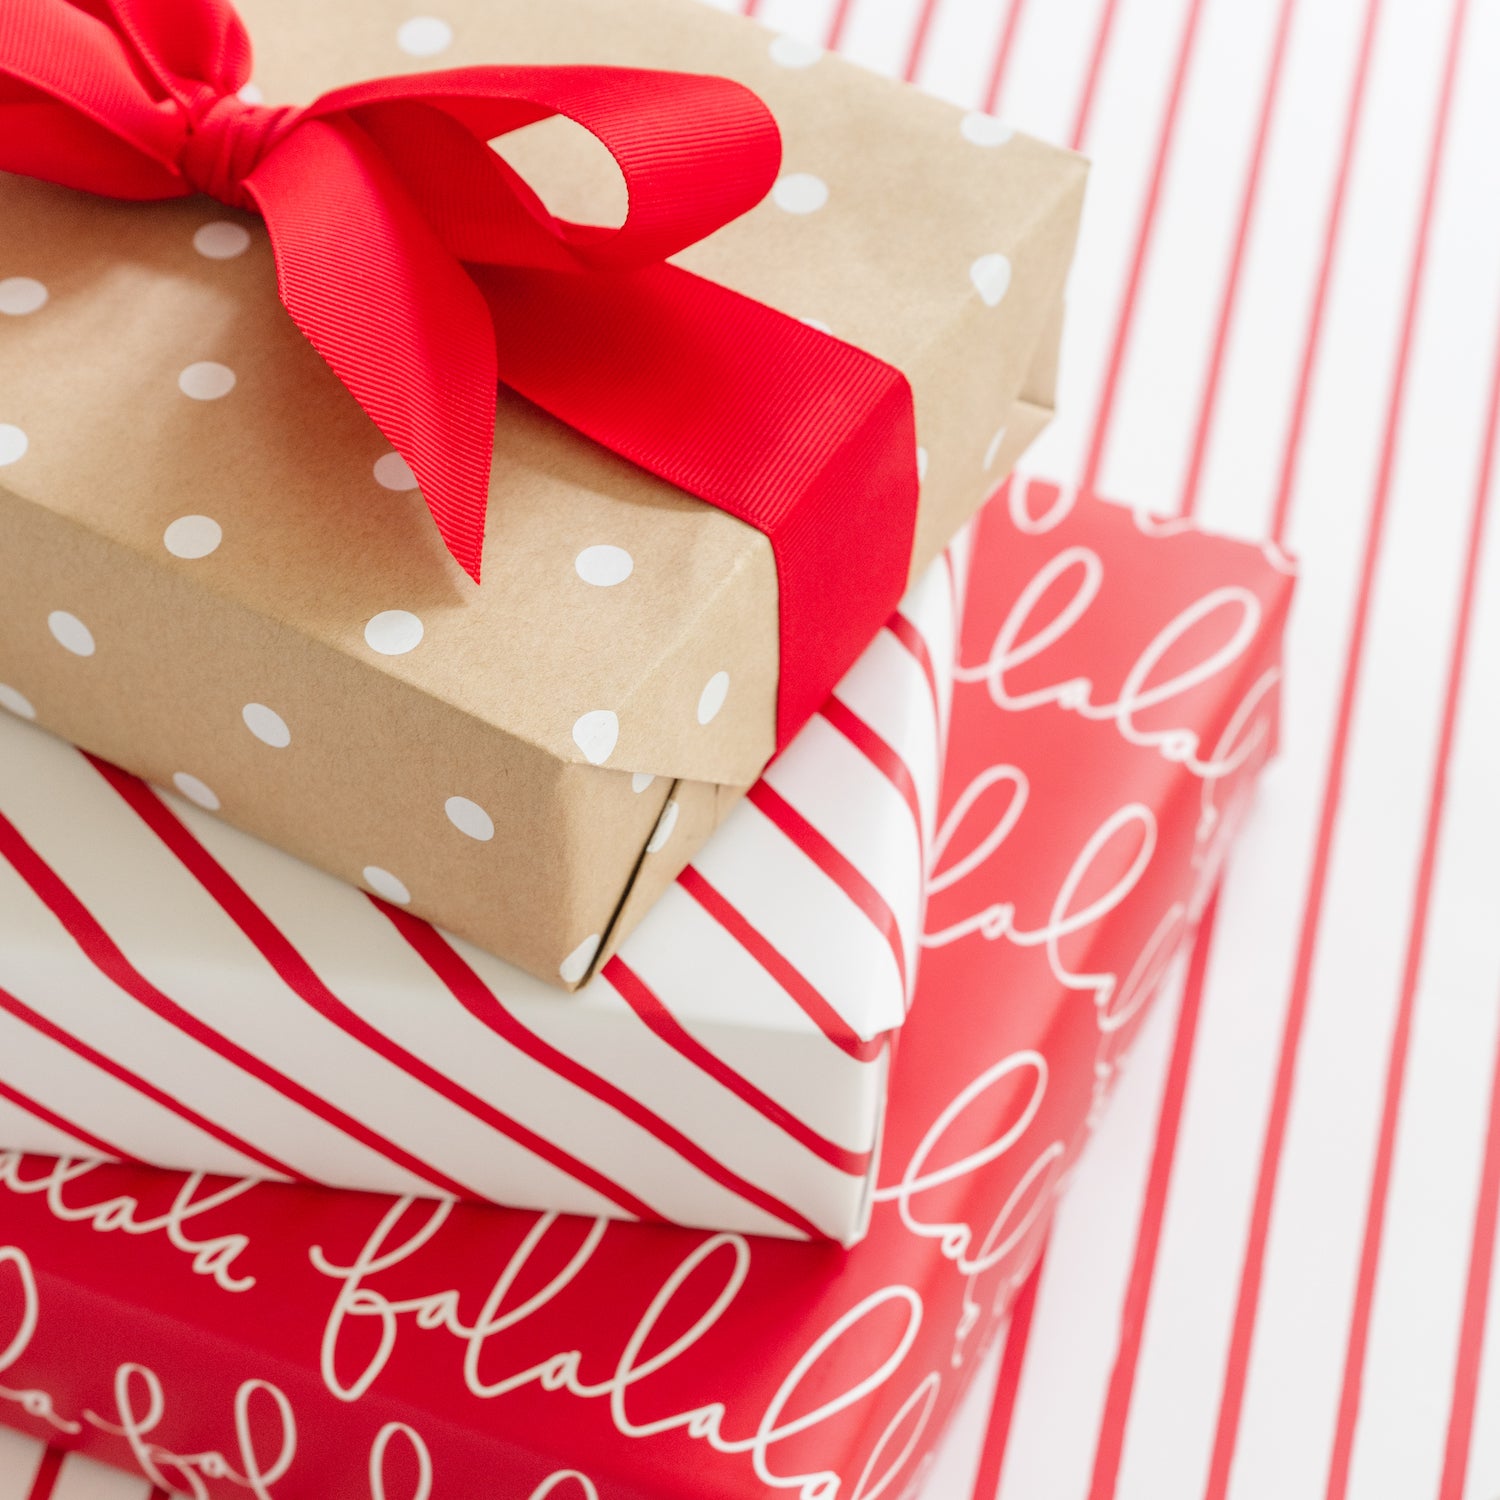 Red Falalala Wrapping Paper